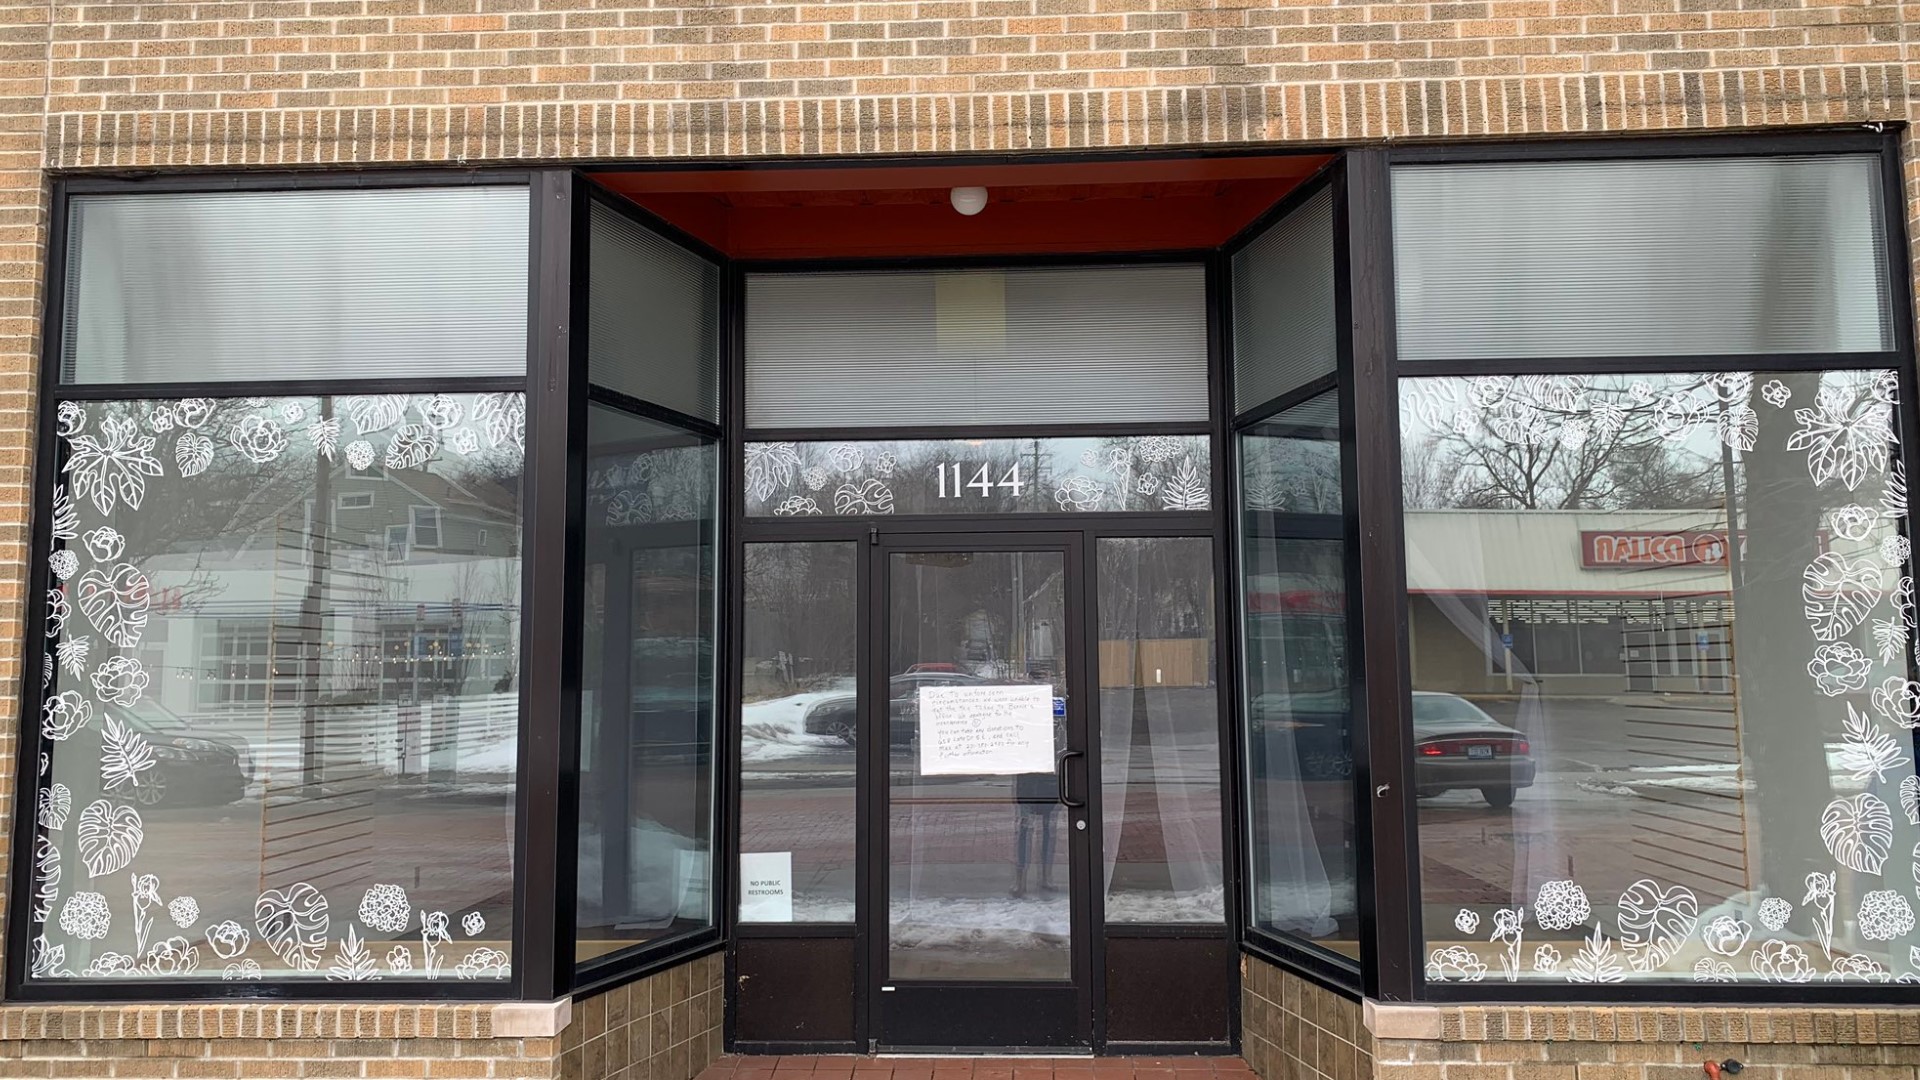 Both Michael Bloomberg and Sen. Bernie Sanders have opened campaign offices in Grand Rapids. The offices are about one mile away from each other.